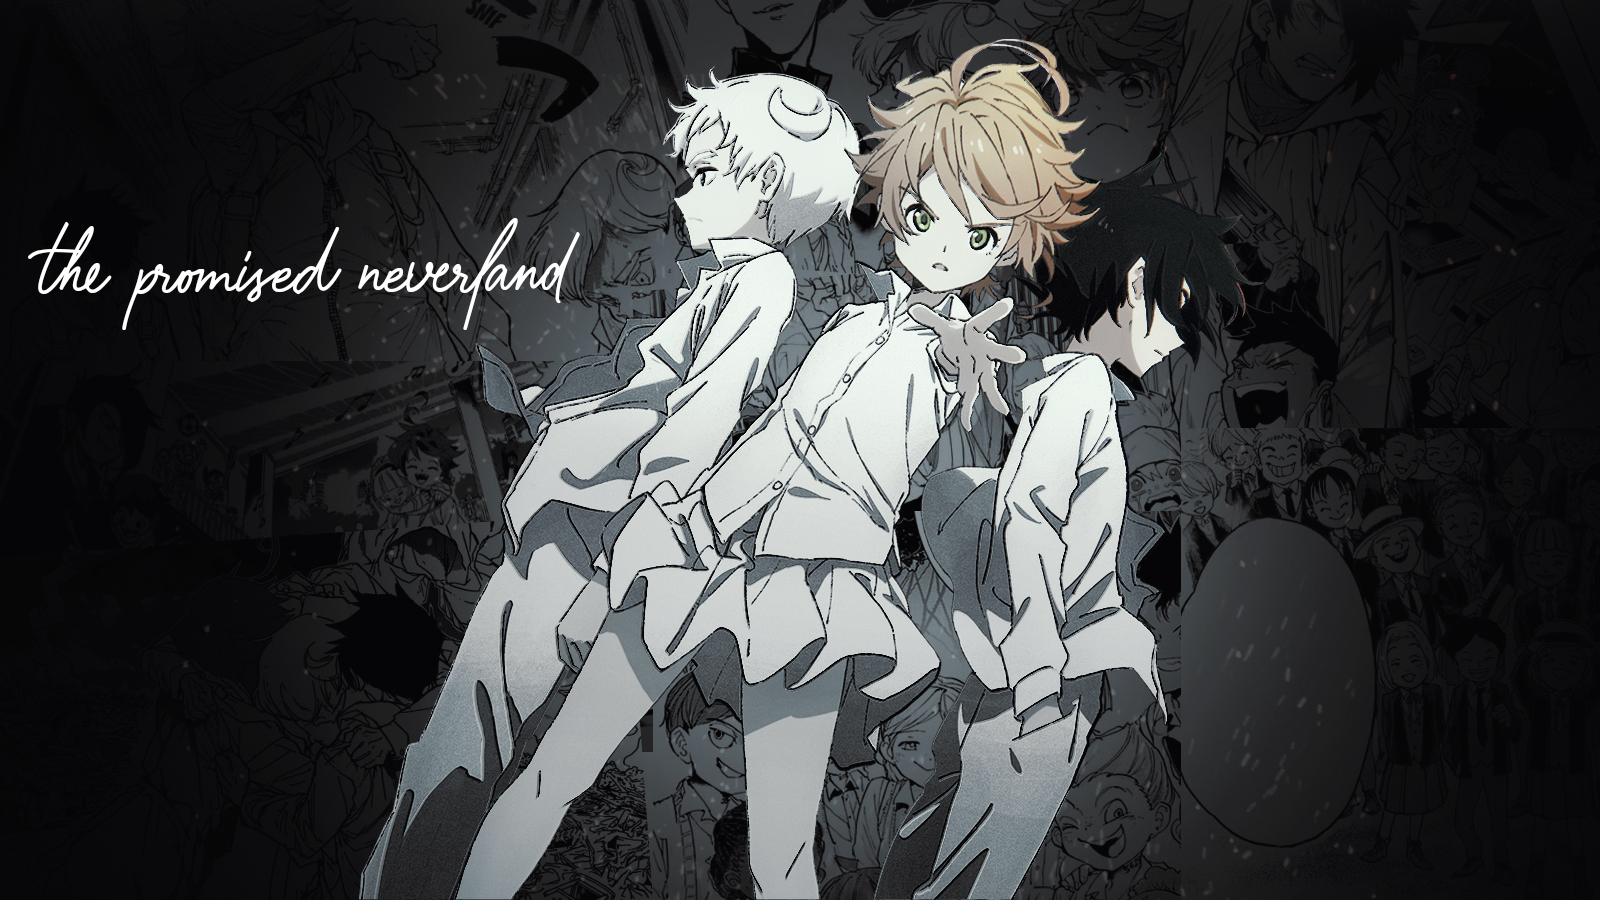 Wallpaper : Emma The Promised Neverland, The promised neverland, Yakusoku  no neverland, anime girls 1080x1920 - ᶜᵒᵈᵉ - 1975763 - HD Wallpapers -  WallHere